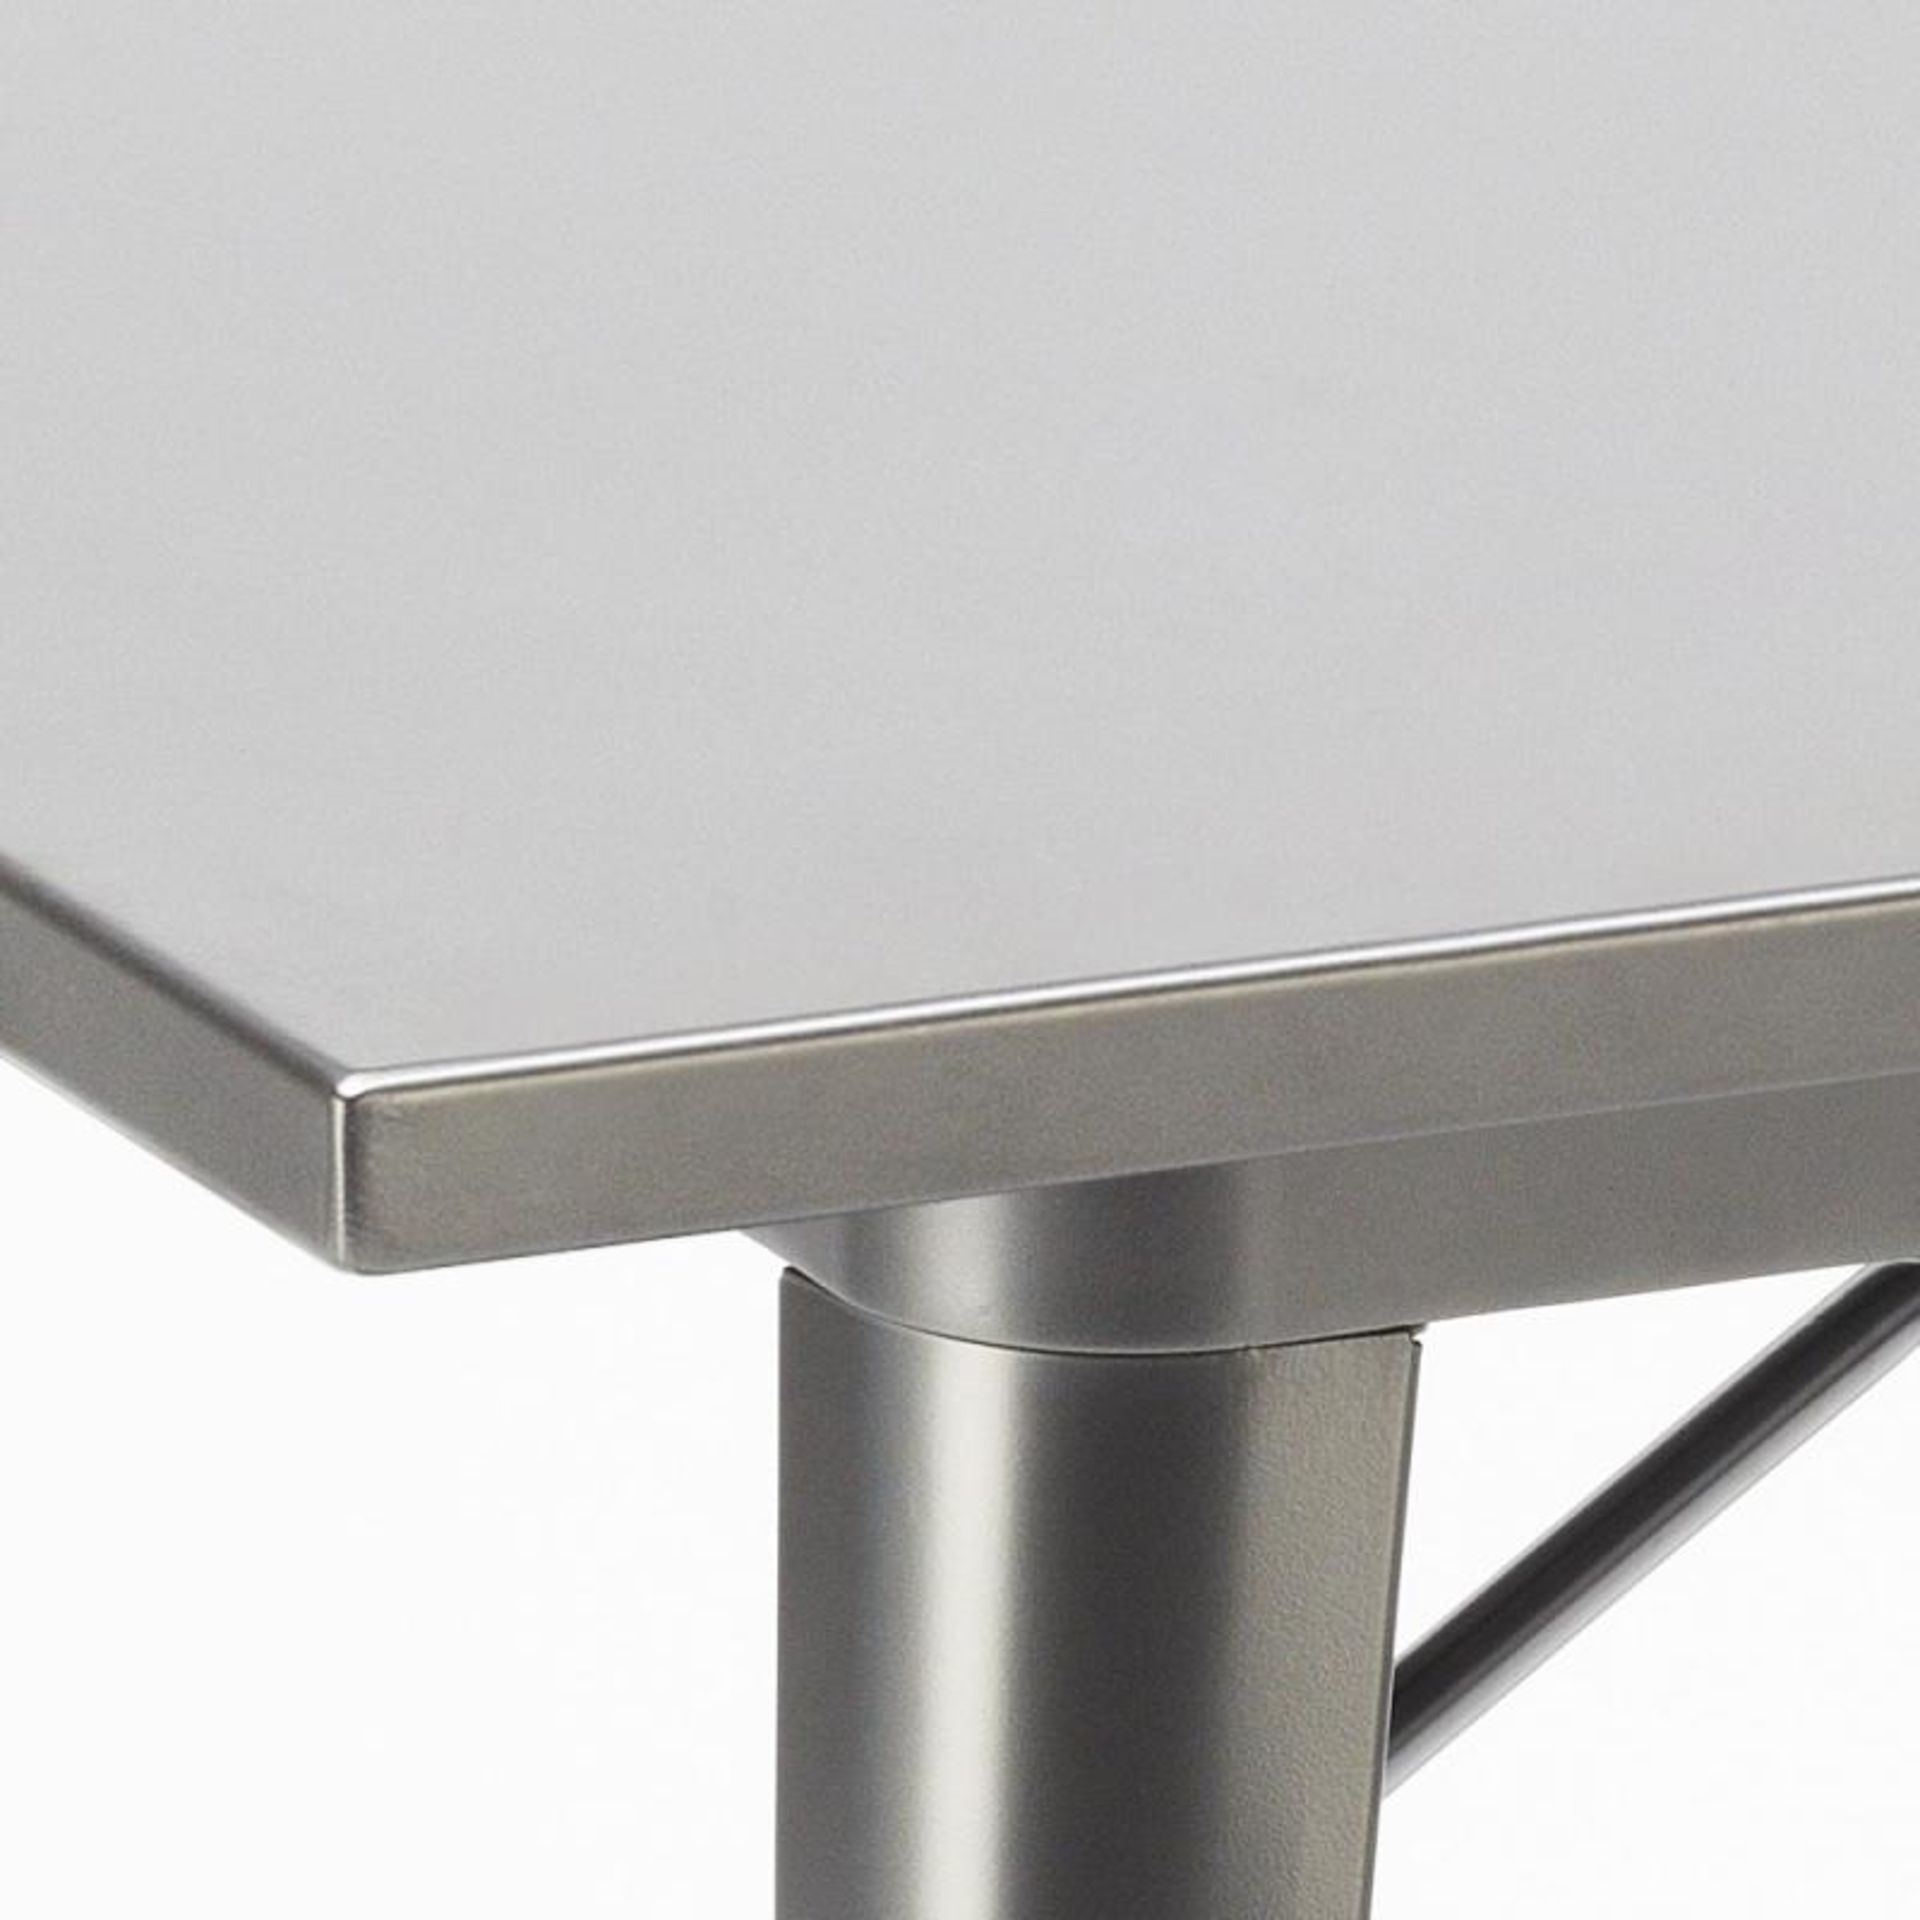 1 x Xavier Pauchard / Tolix Inspired Industrial Outdoor Table In Silver Grey - Dimensions: 80 x 80 x - Image 3 of 3